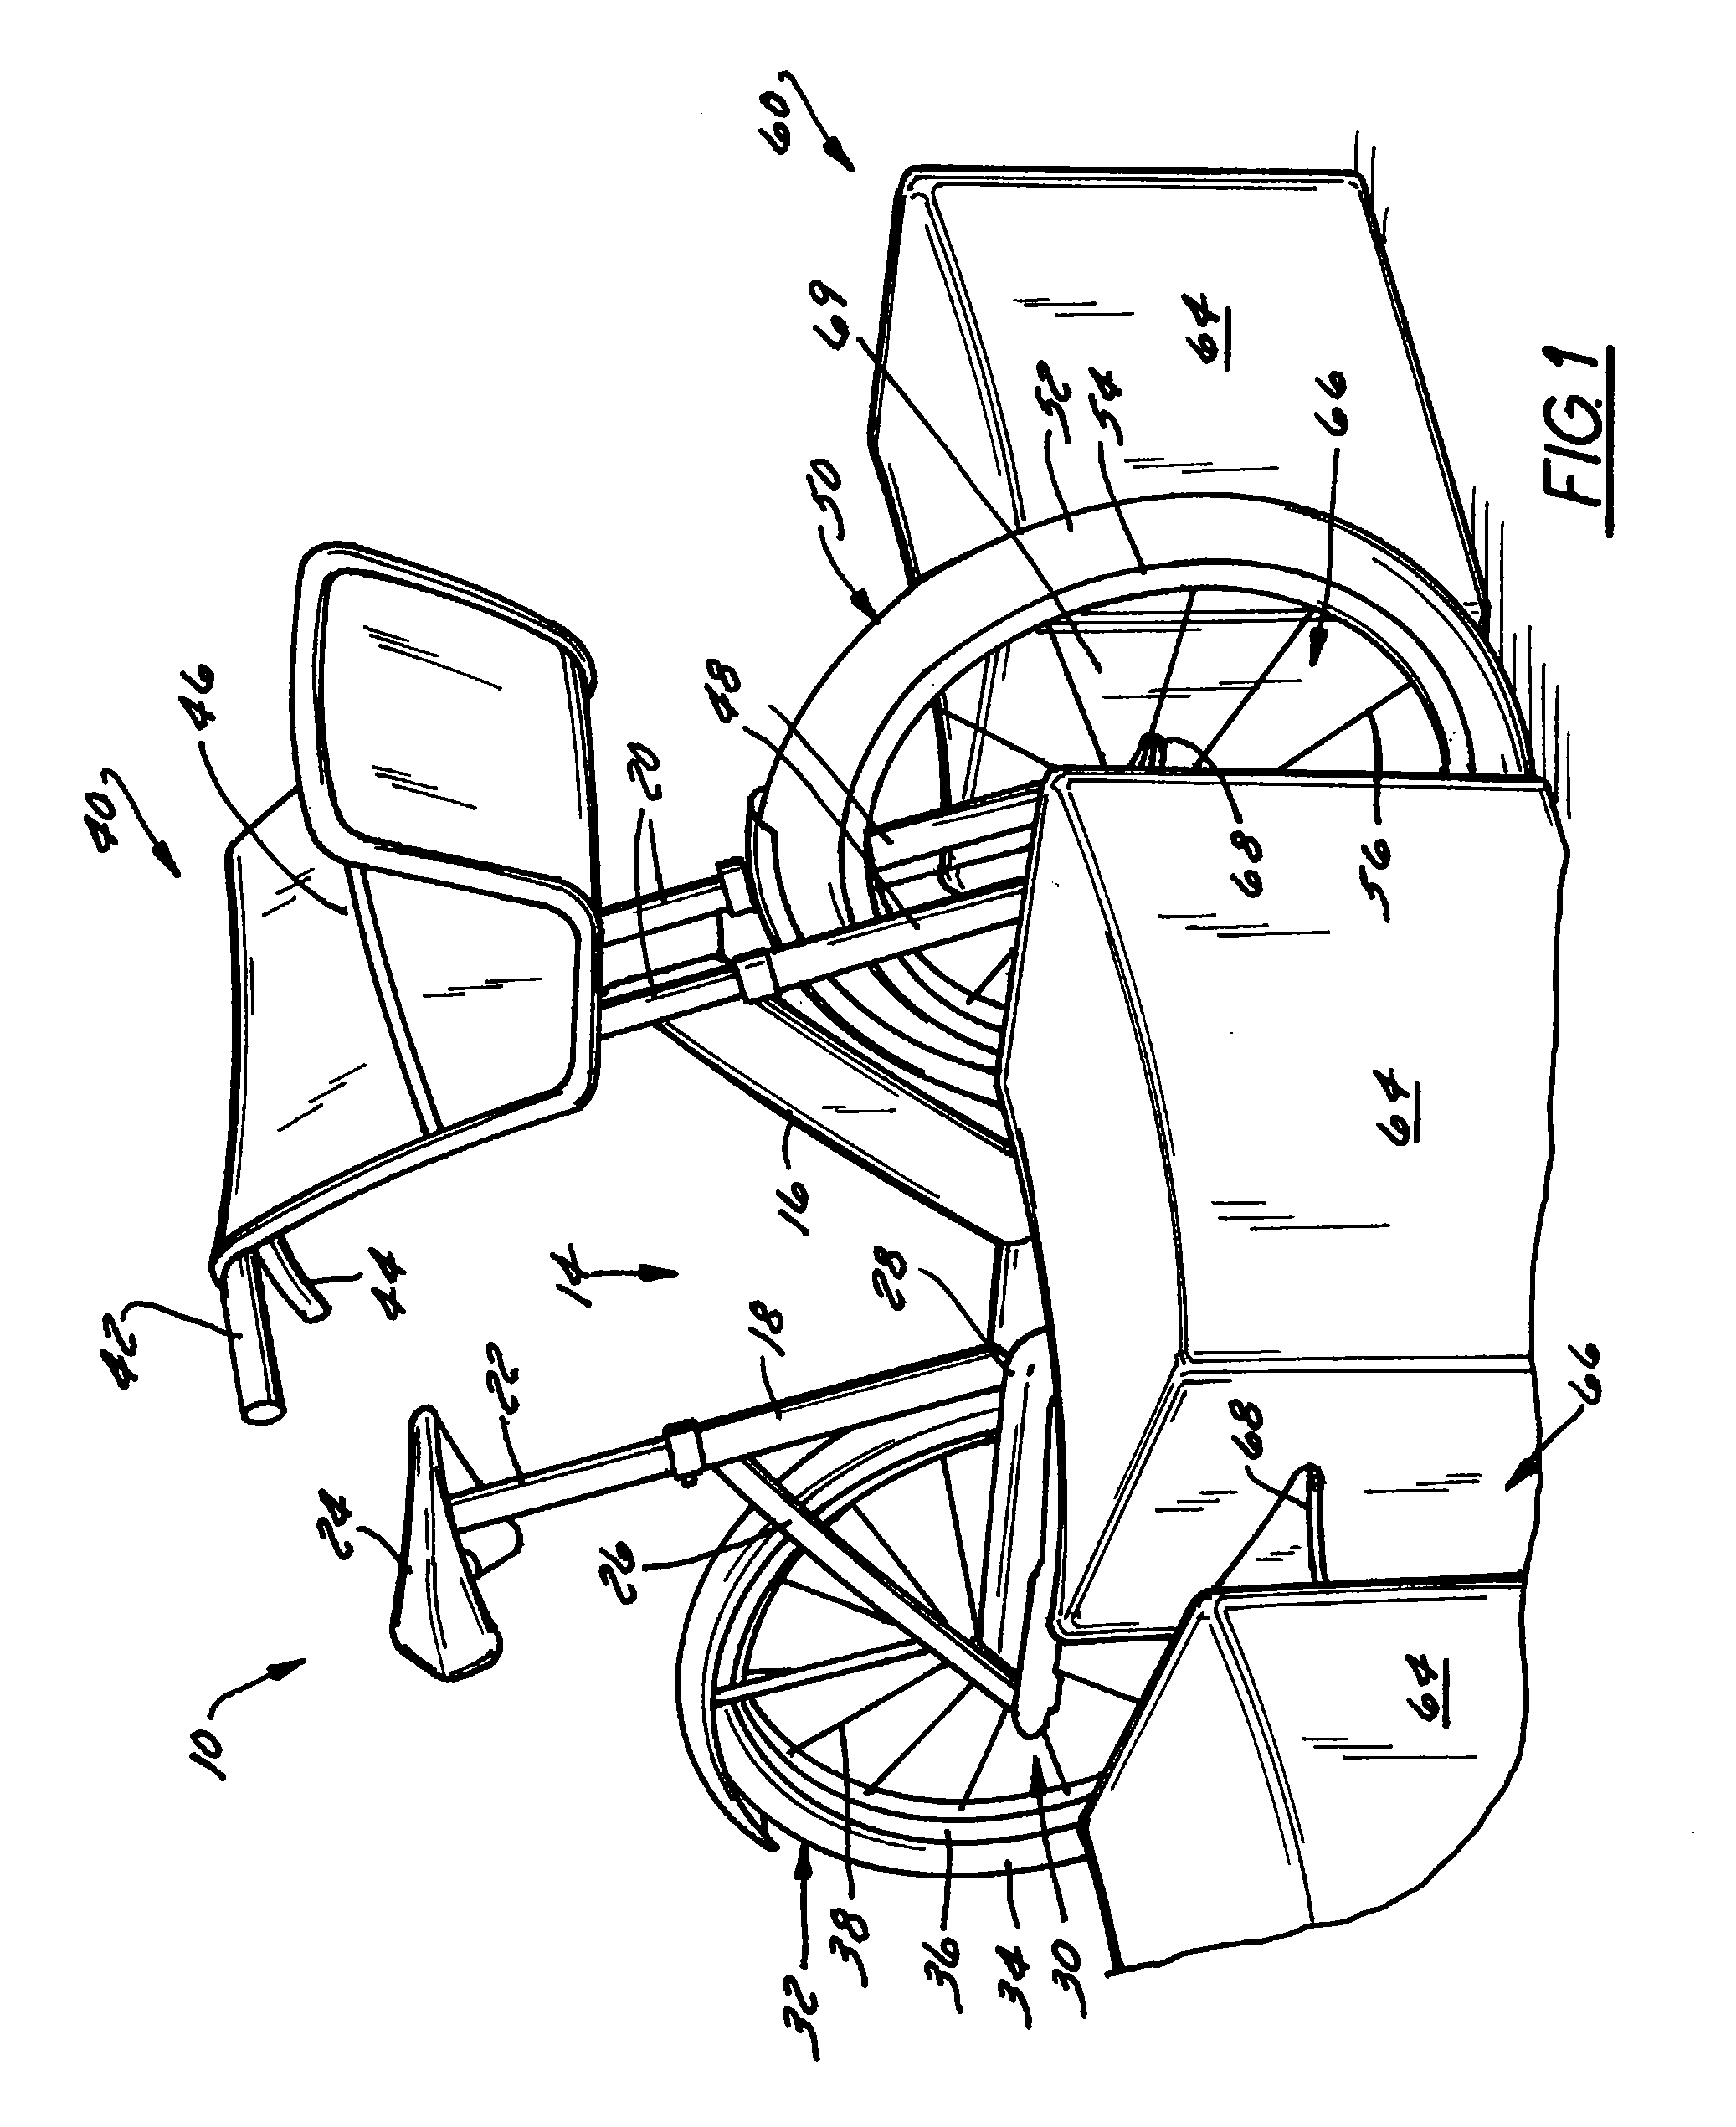 Bicycle Hub Locking Mechanism and Parking System